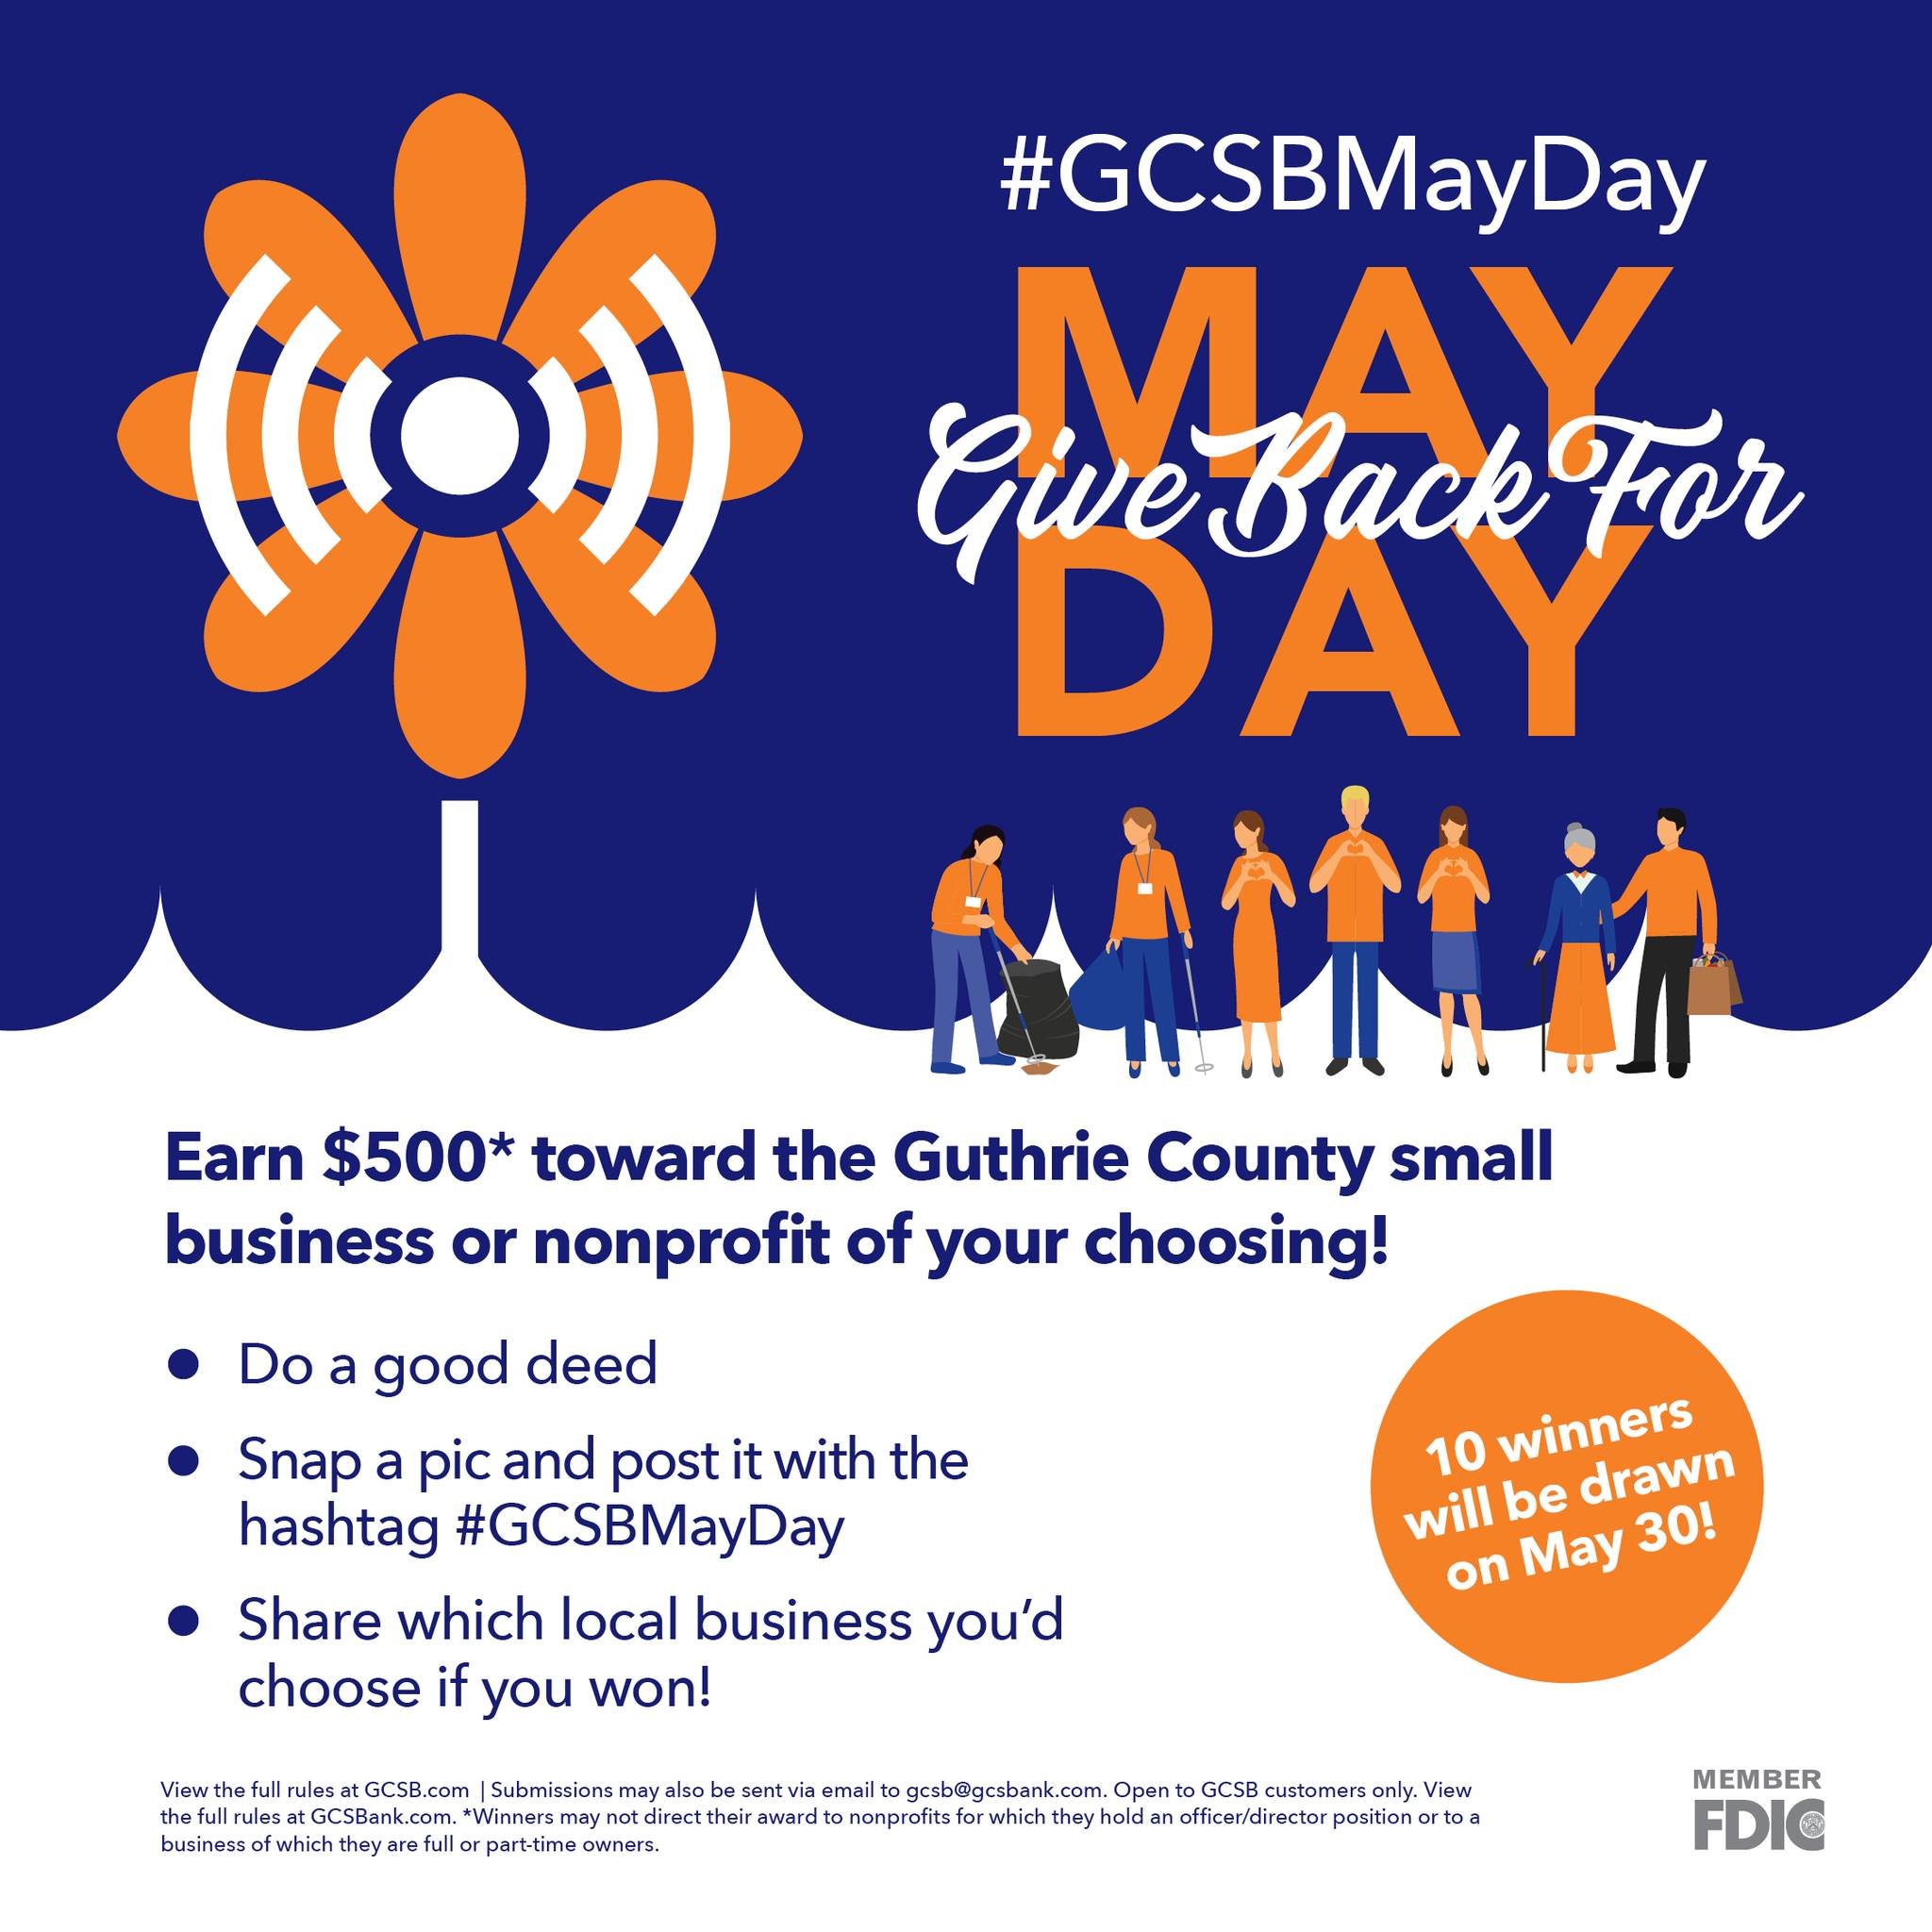 Guthrie County State Bank is spreading kindness via good deeds!

Your kind act could earn $500 toward a Guthrie County small business or nonprofit of your choosing! 

See details below! 

Spread kindness!

#GCSBMayDay